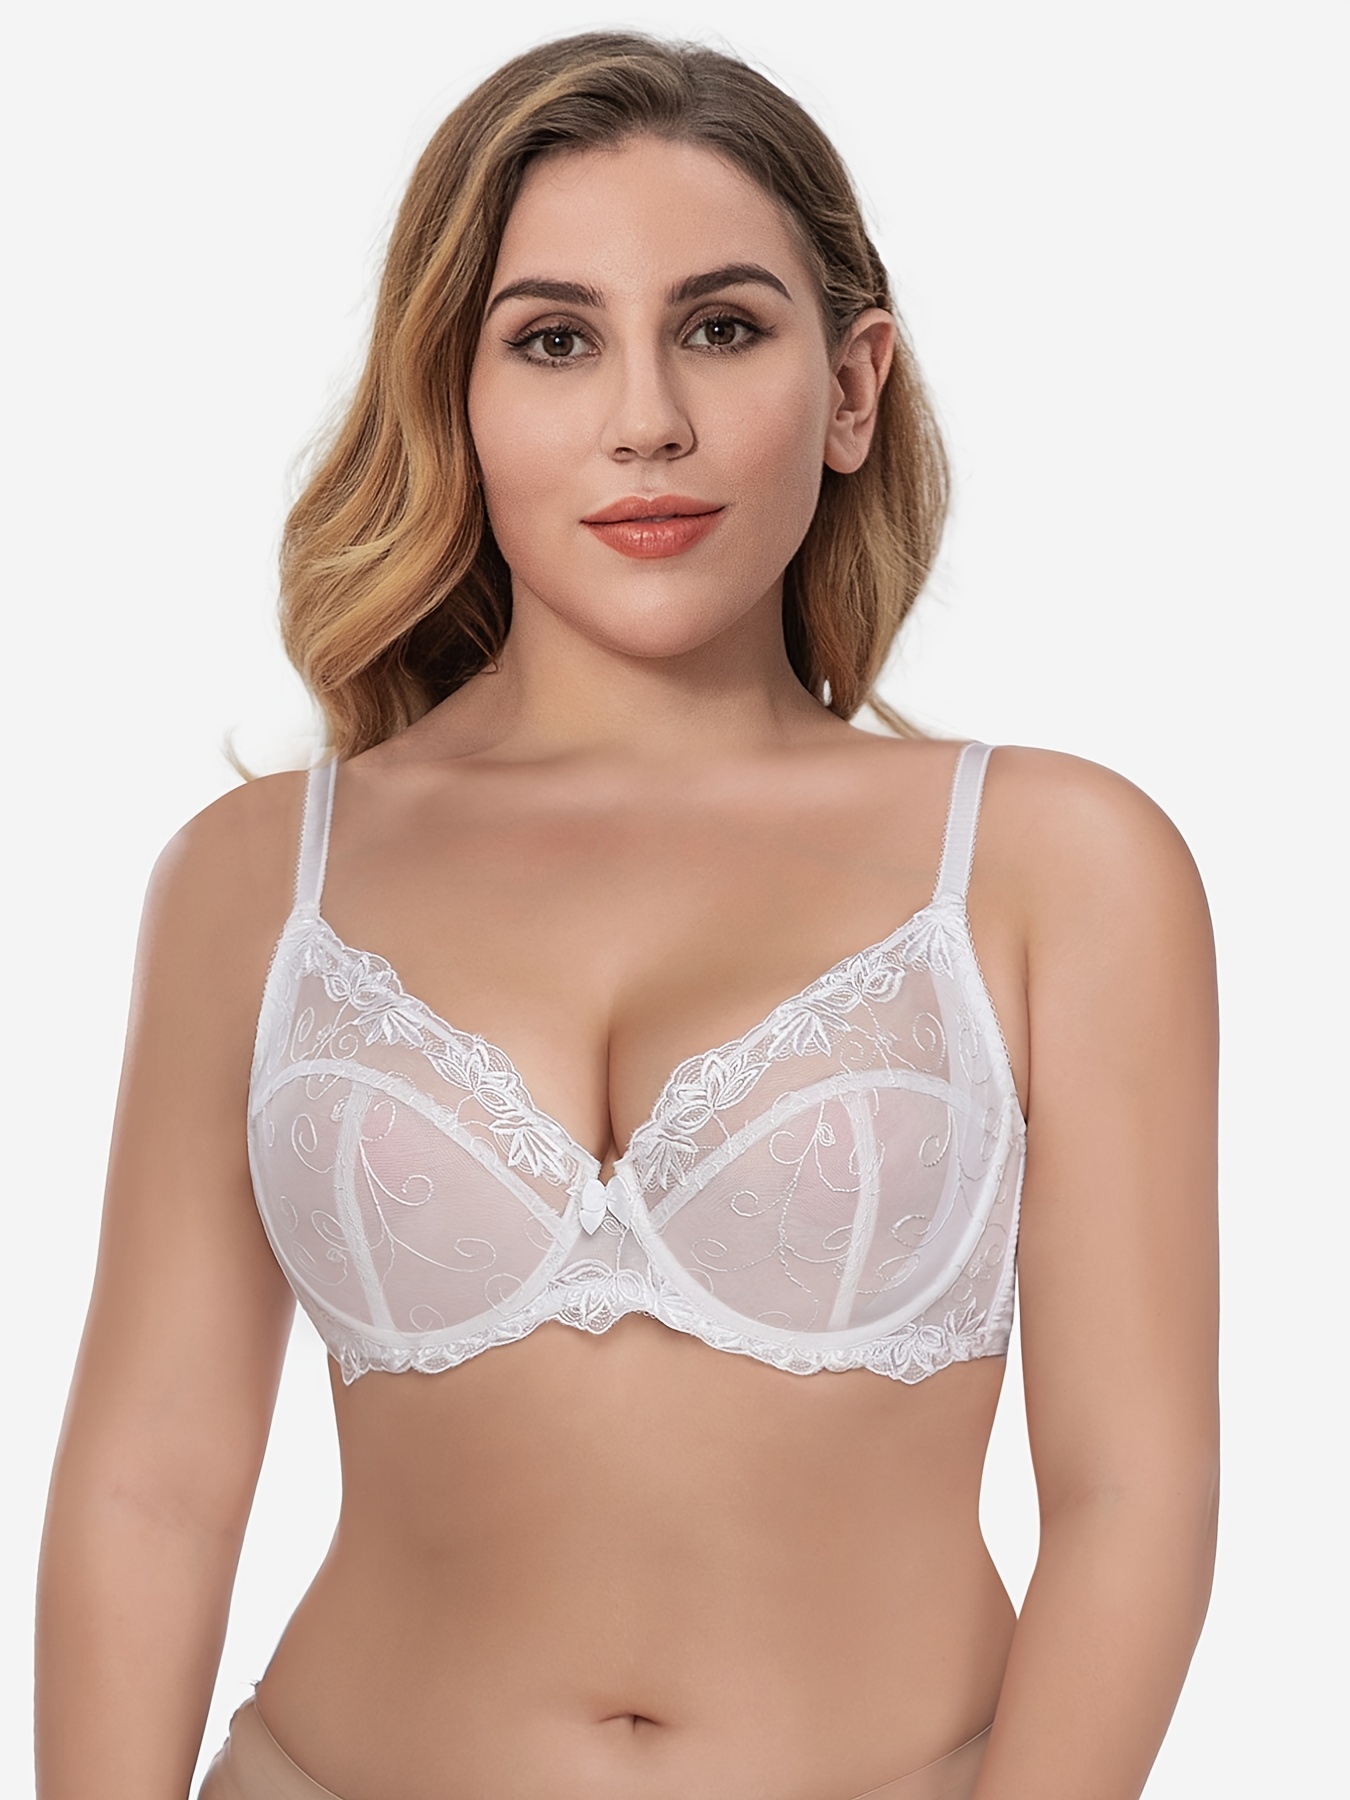 Sexy Lace Sheer Bra Bras For Women Full Coverage, Plus Size E J Cup BH Top  Lingerie Underwear YQ231101 From Ephemerall, $12.5